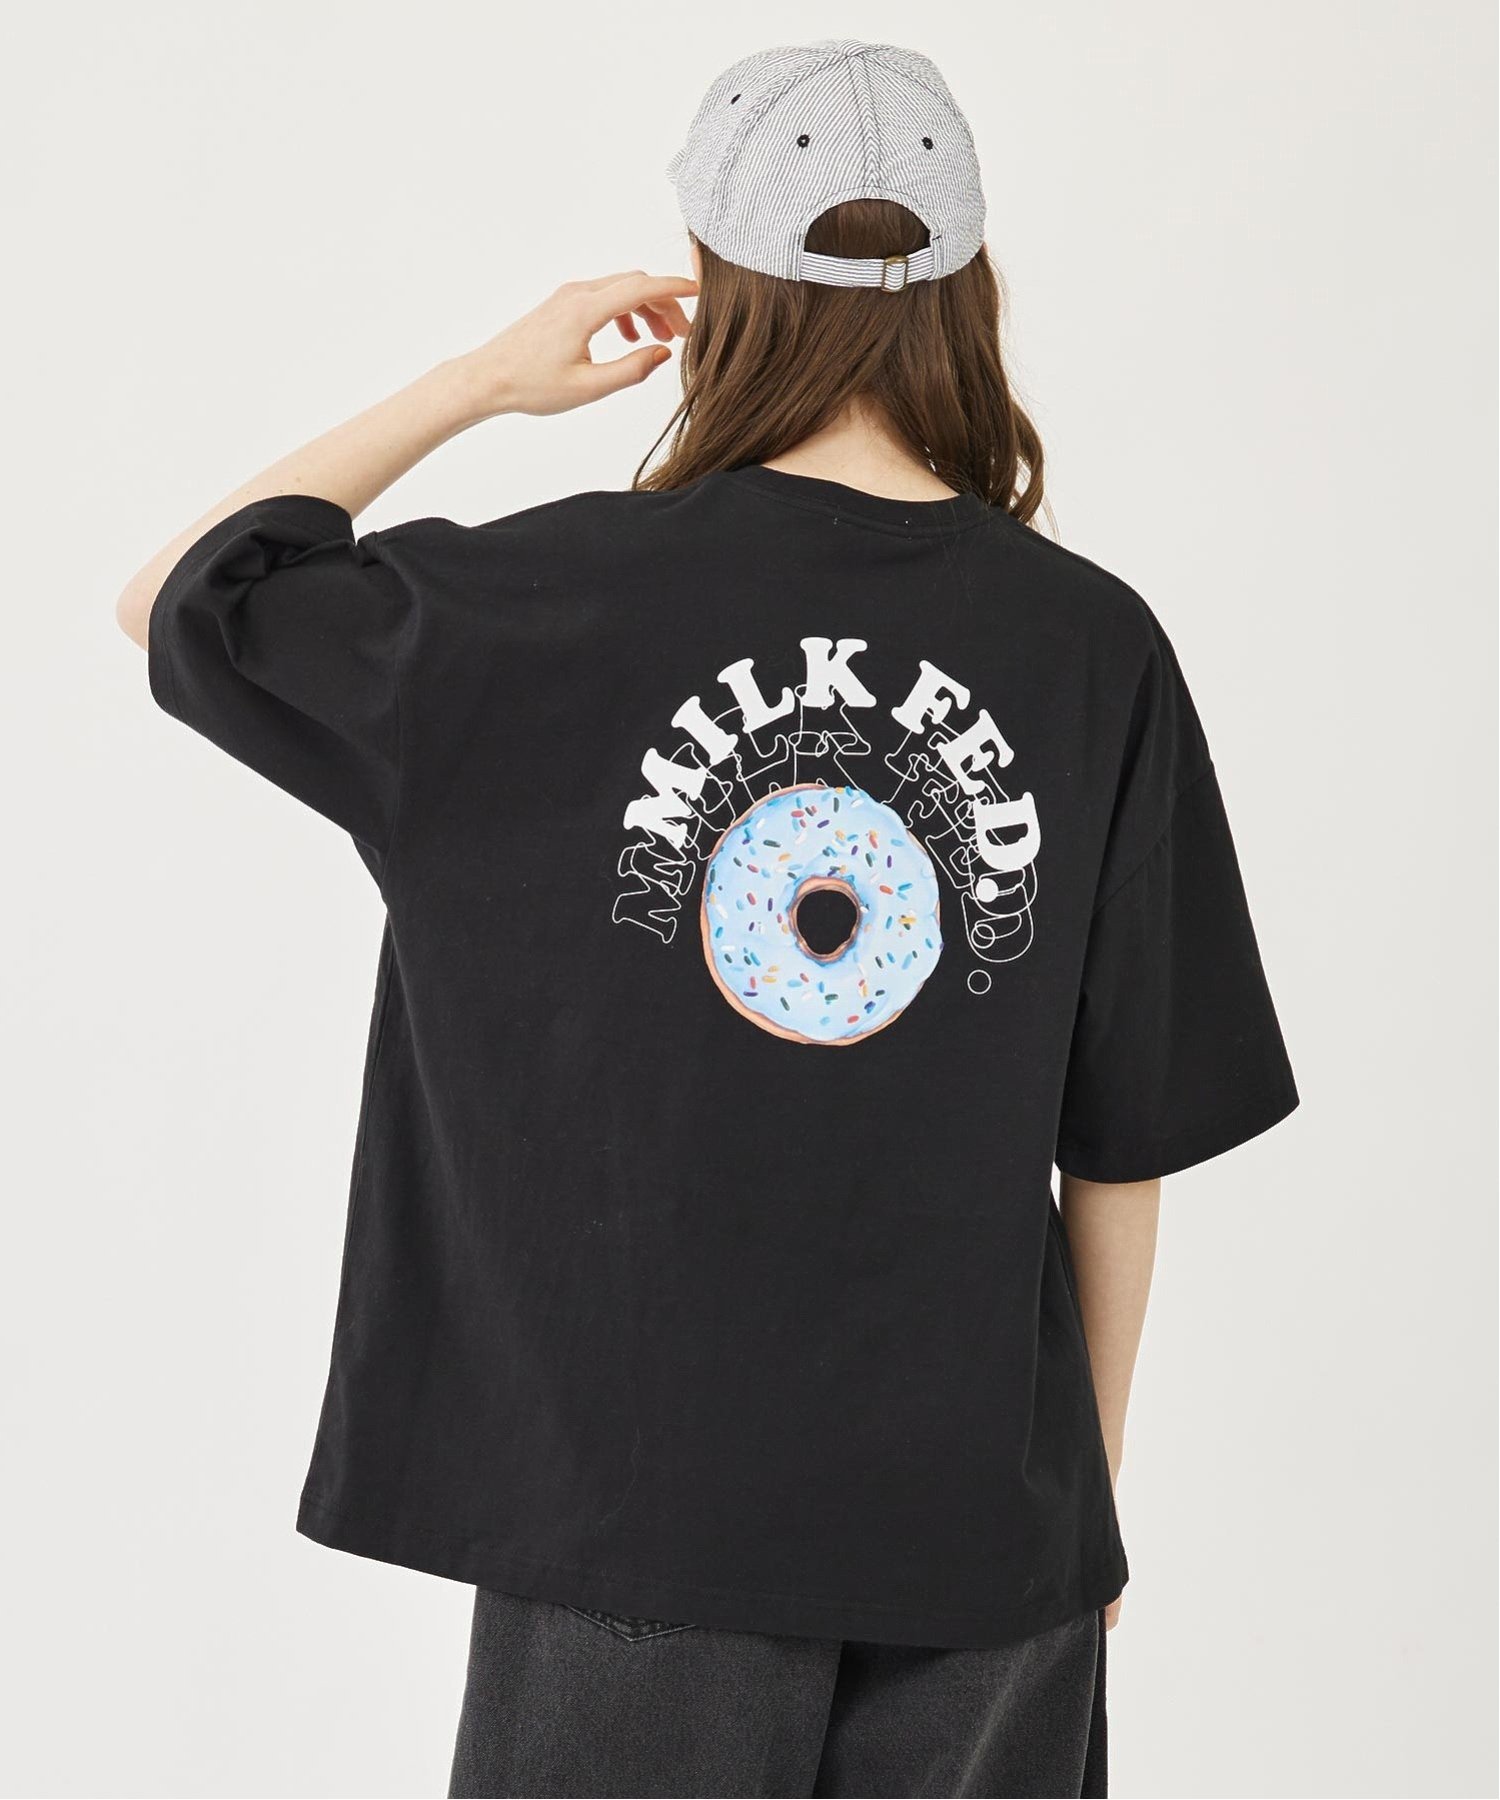 MILKFED. ROUND DONUTS WIDE S/S